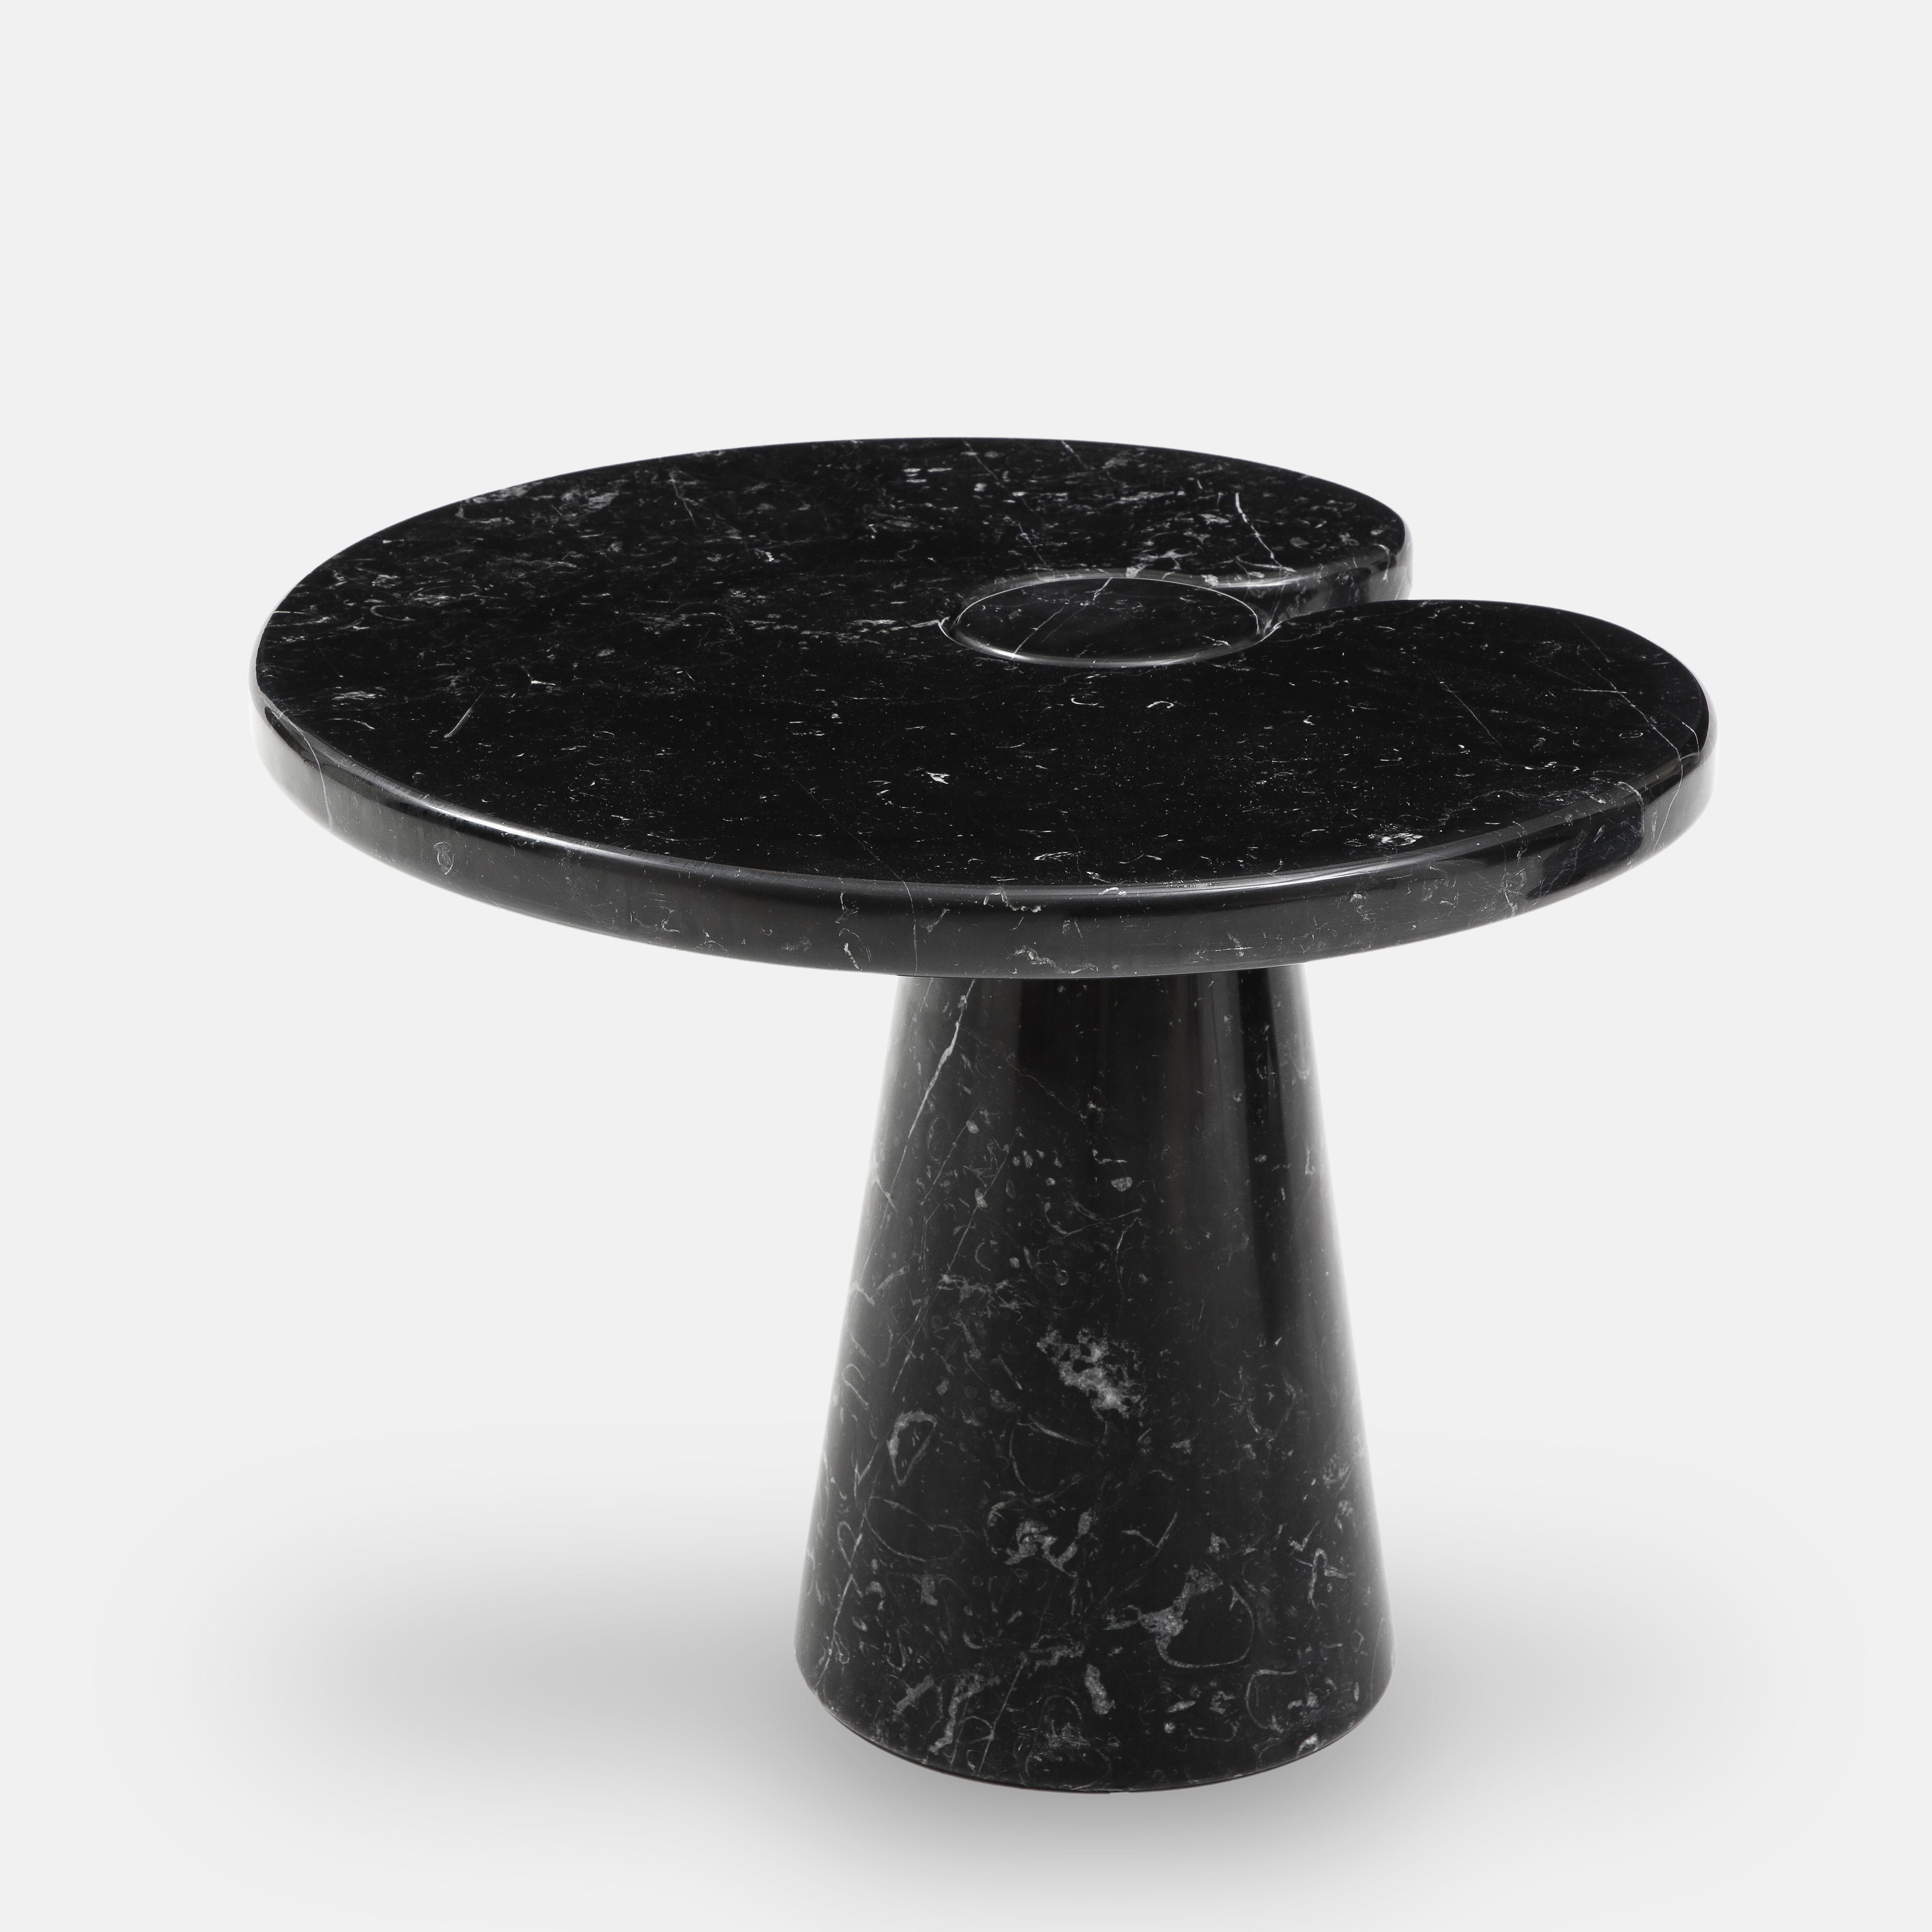 Carrara Marble Angelo Mangiarotti Nero Marquina Marble Side Table from 'Eros' Series, 1971